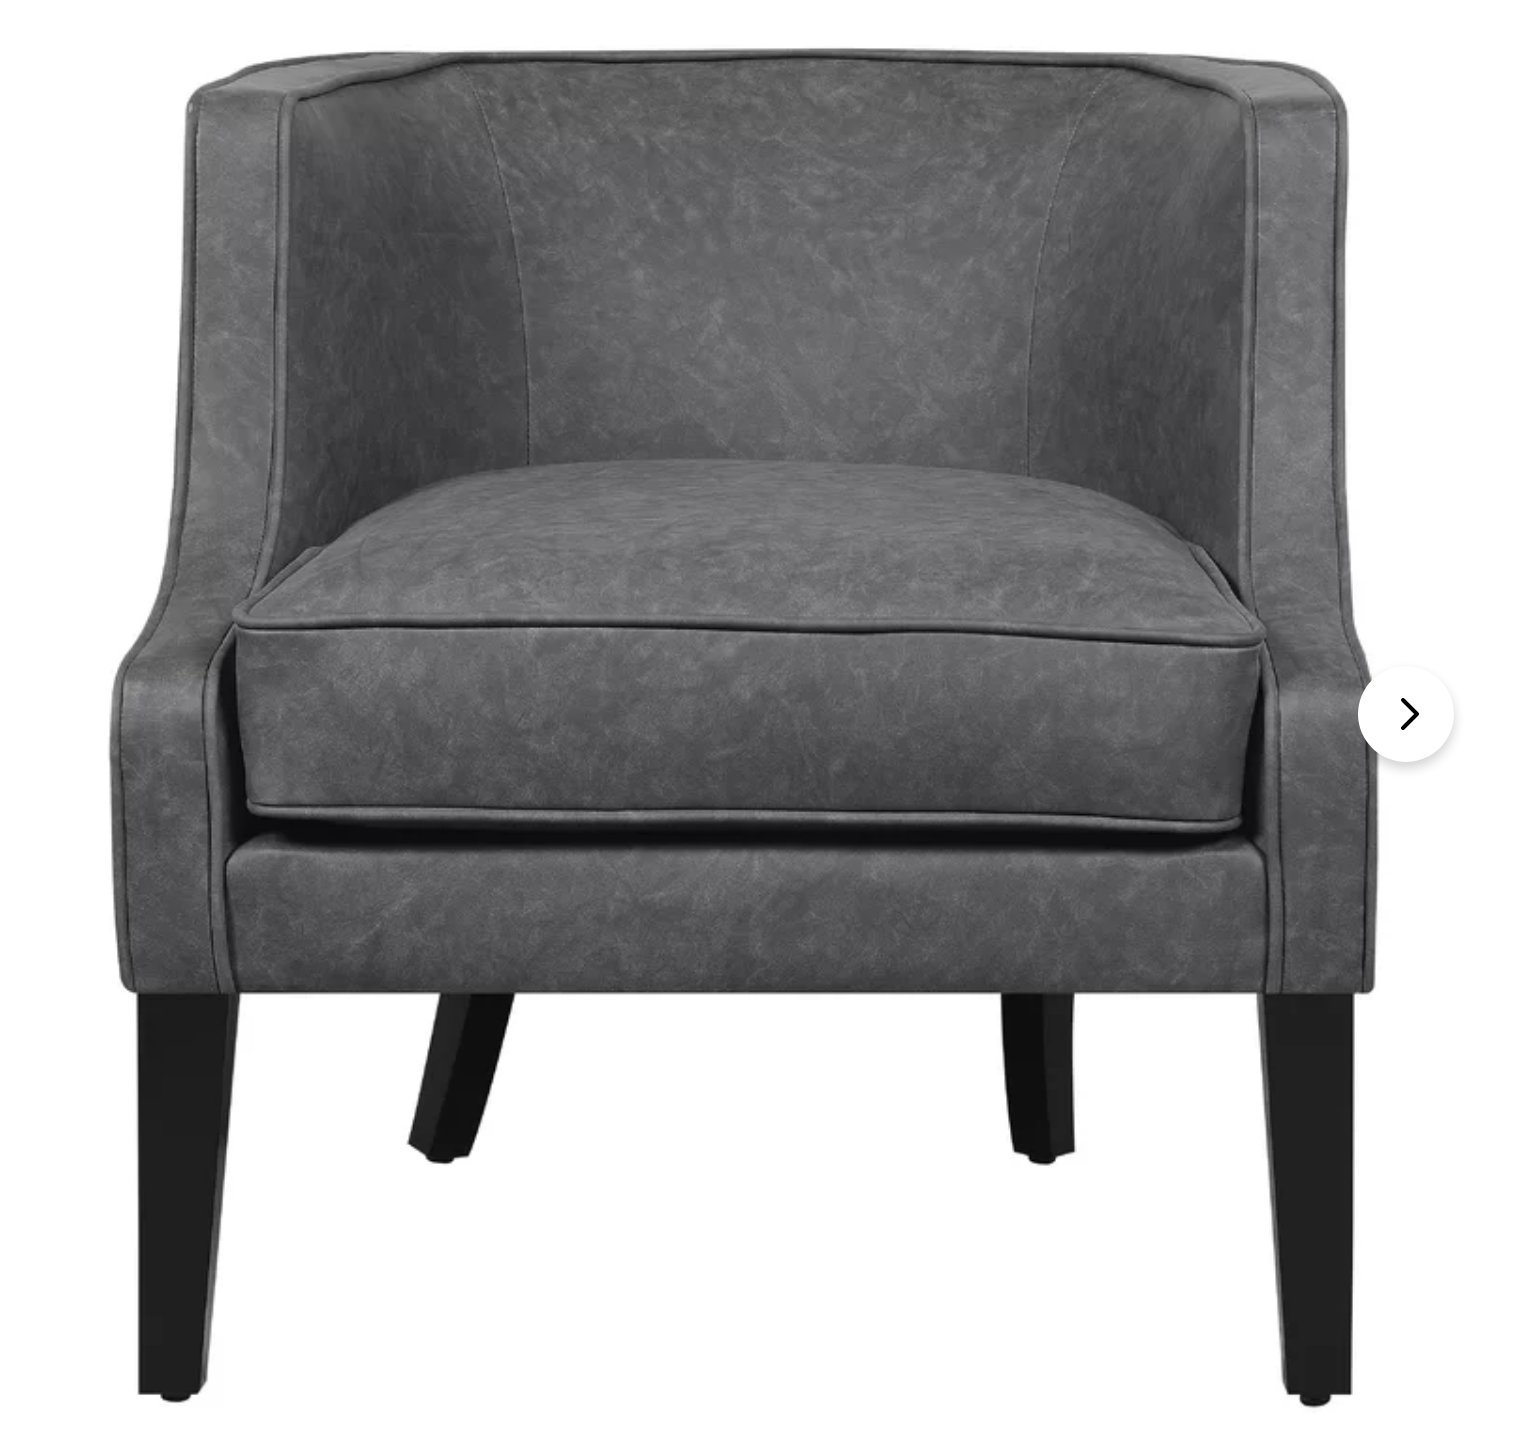 28.2" W Faux Leather Barrel Chair - Image 0